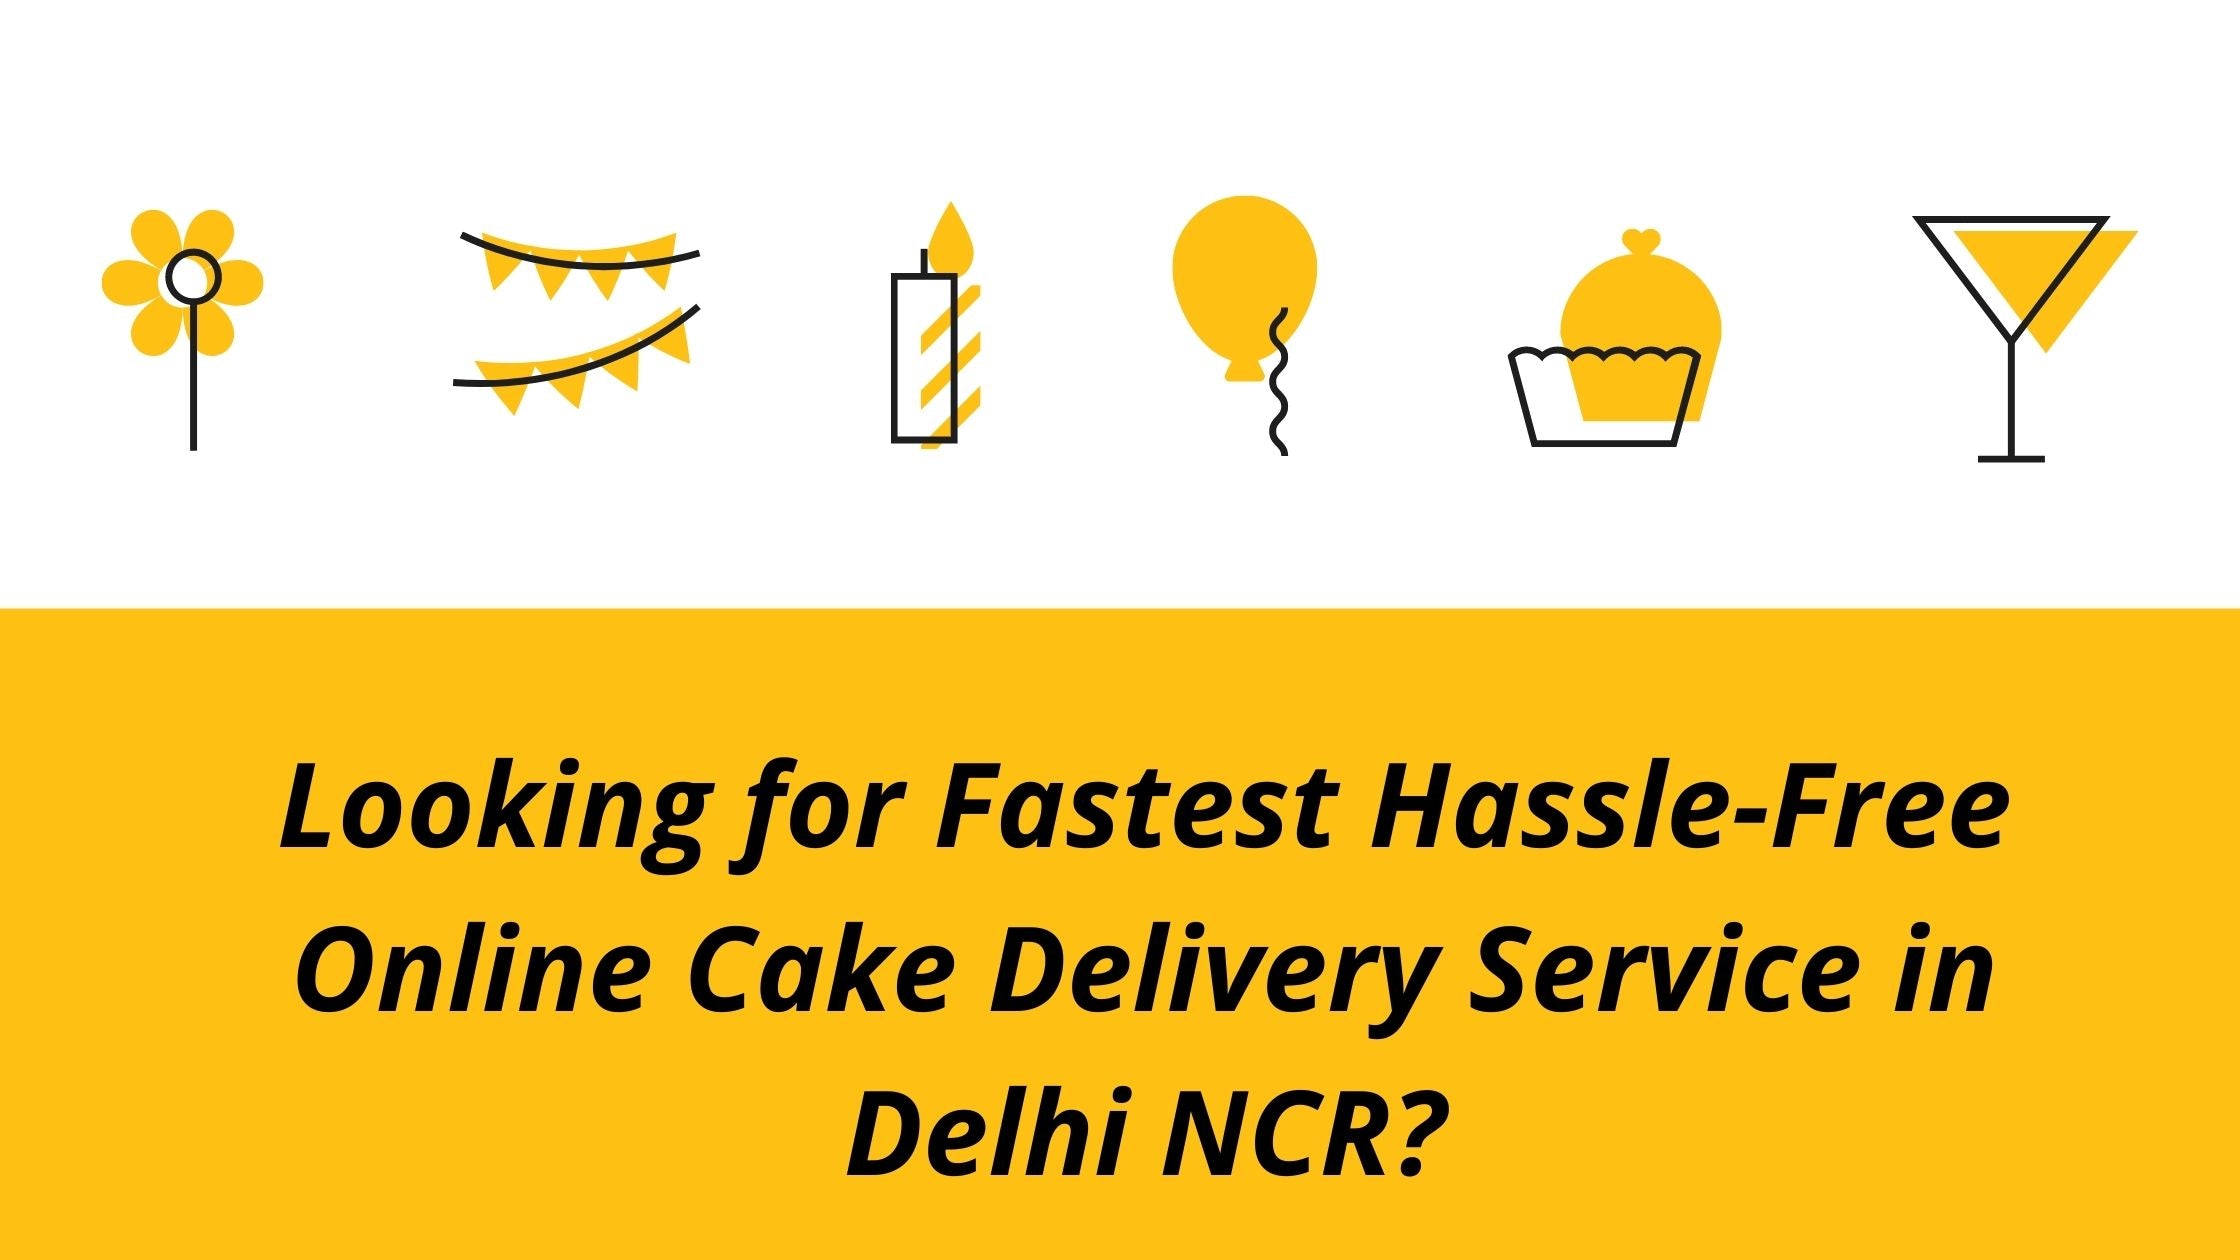 Looking for Fastest Hassle-Free Online Cake Delivery Service in Delhi NCR?